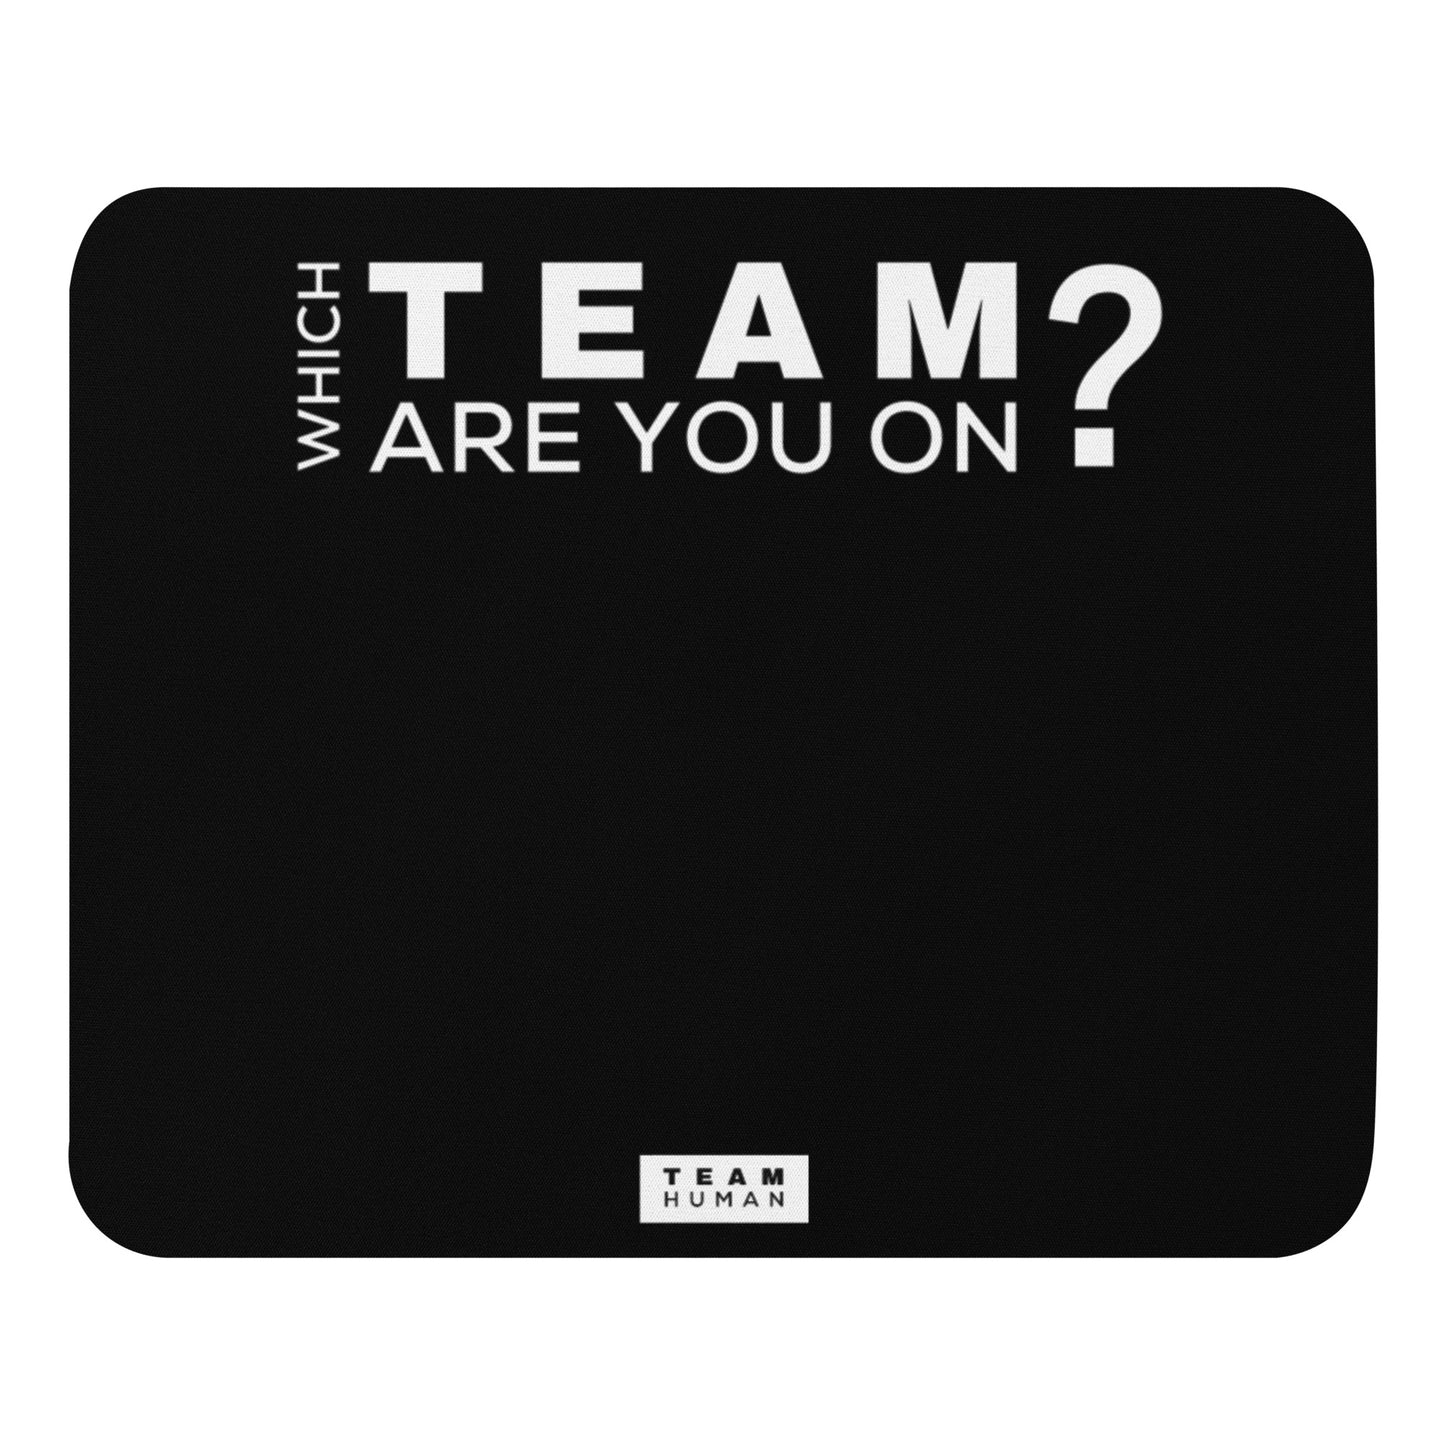 The Mouse Pad